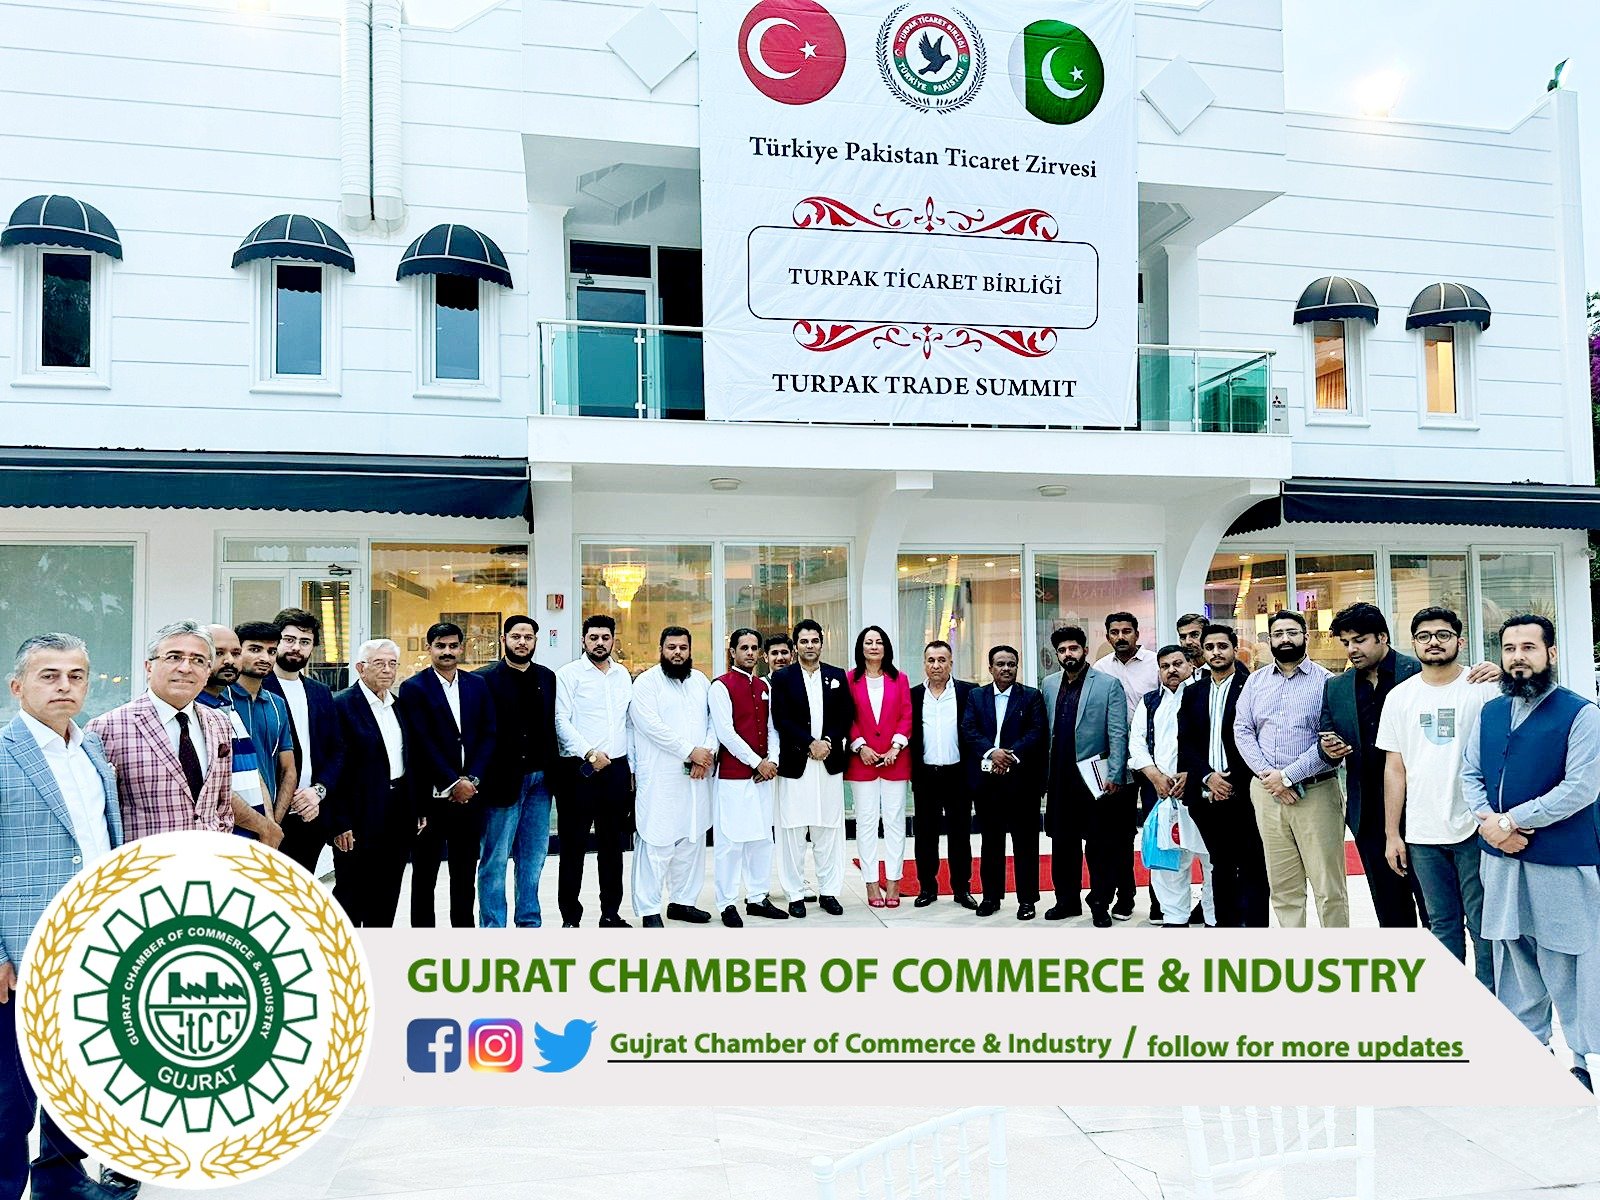 A grand #dinner and #cultural_night was organized by #TurPak in honor of the Gujrat Chamber of Commerce & Industry delegation and the business community of #Mersin following the successful Business Investment and Opportunity Conference.